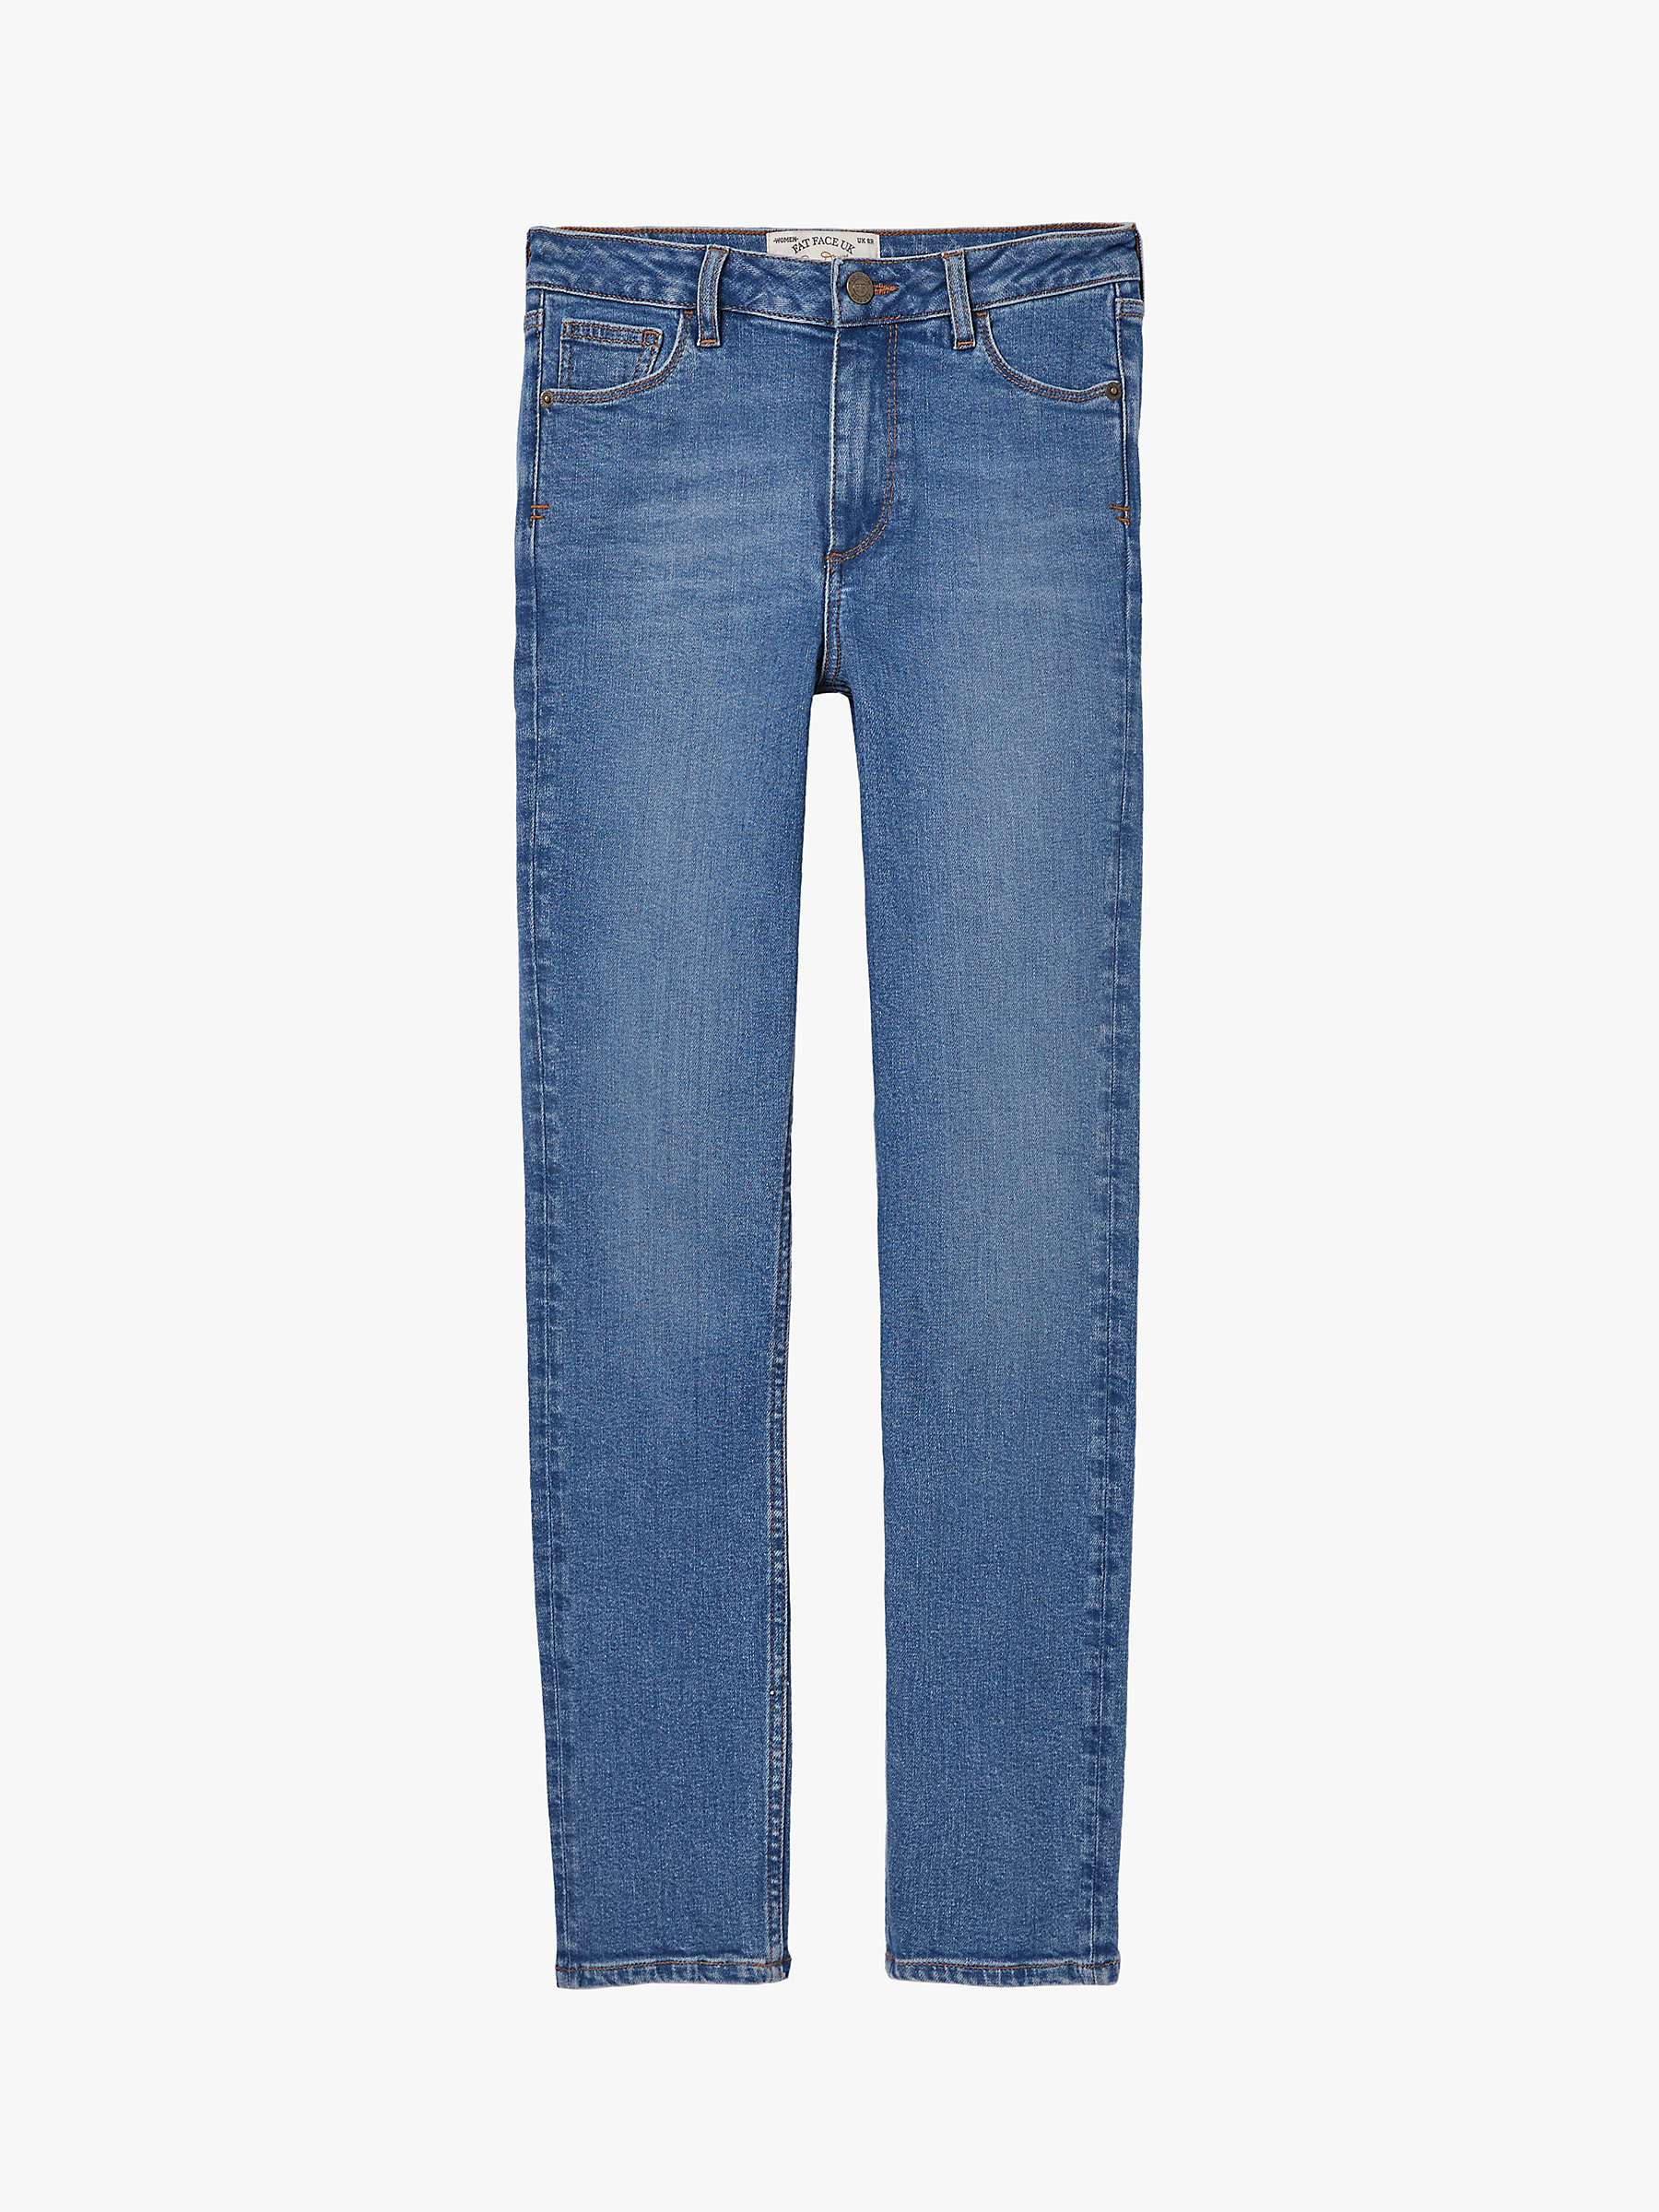 Buy FatFace Sway Slim Jeans Online at johnlewis.com